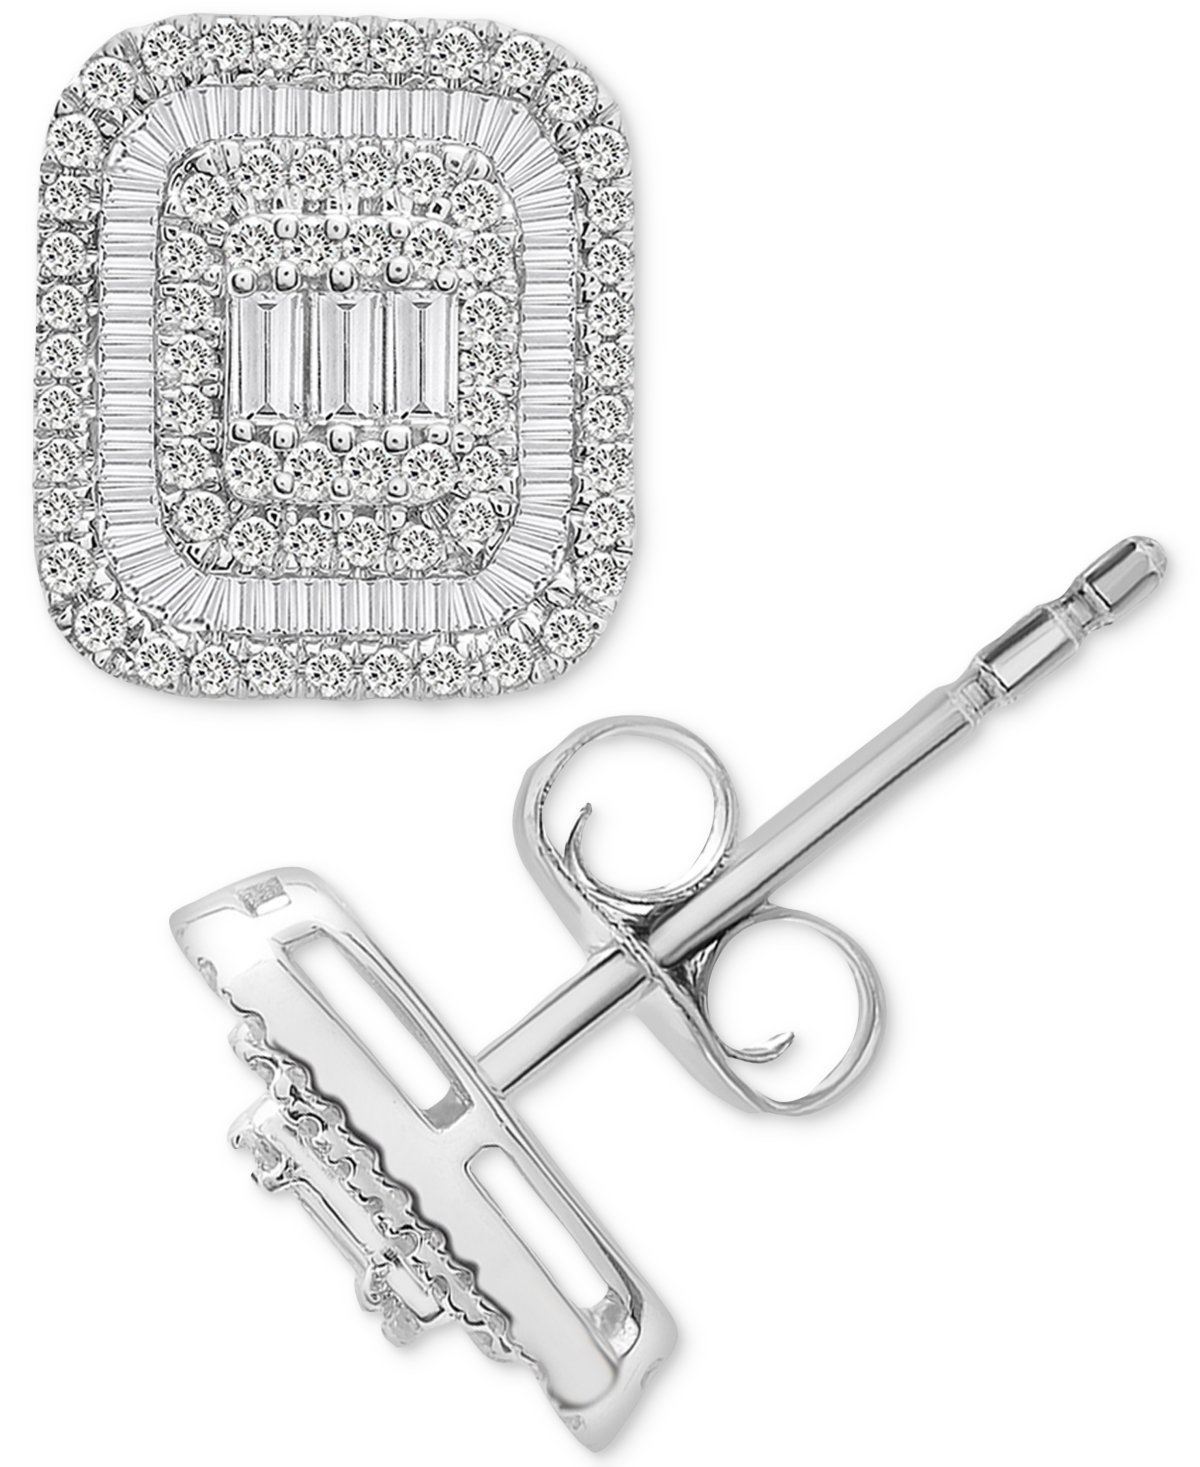 Diamond Round & Baguette Square Halo Cluster Stud Earrings (1 ct. t.w.) in 14k White Gold, Created for Macy's - White Gold